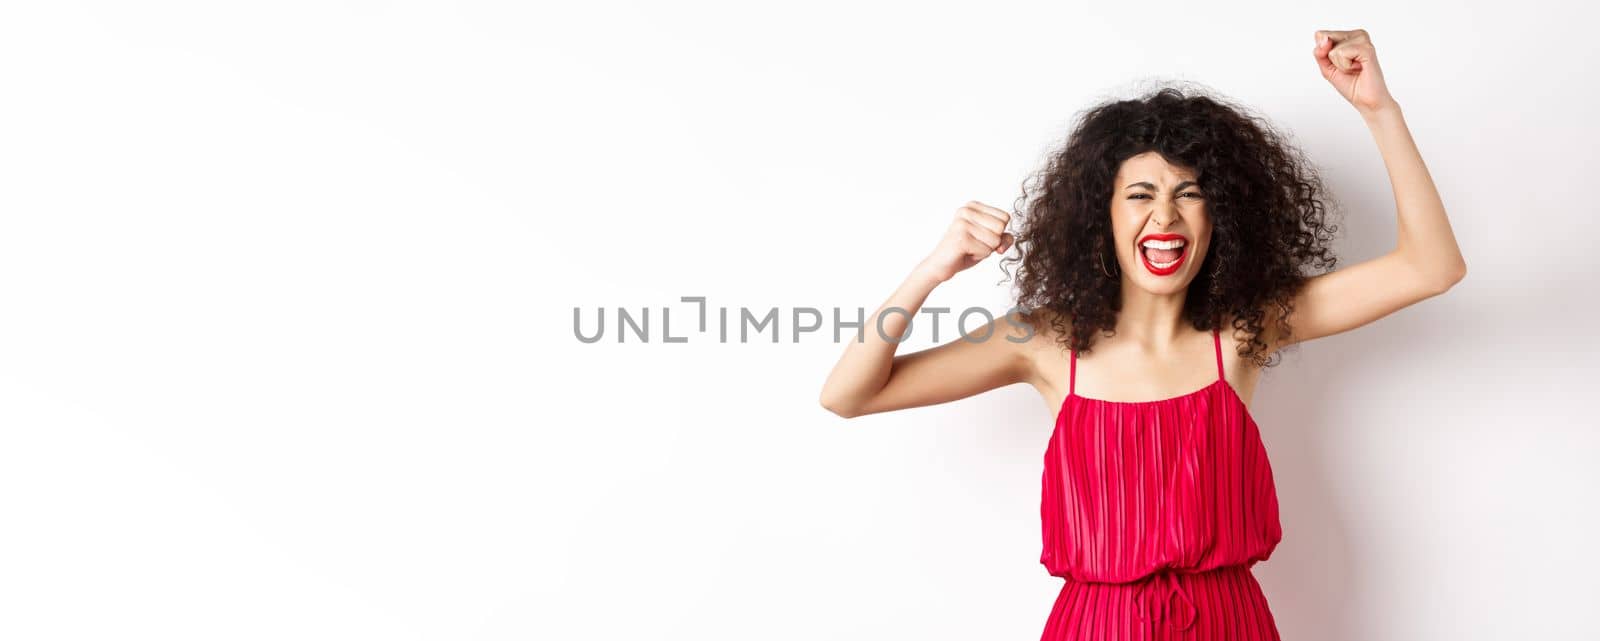 Cheerful emotive woman with curly hair, red dress, raising hands up and chanting, rooting for team, shouting wanting to win, standing on white background by Benzoix